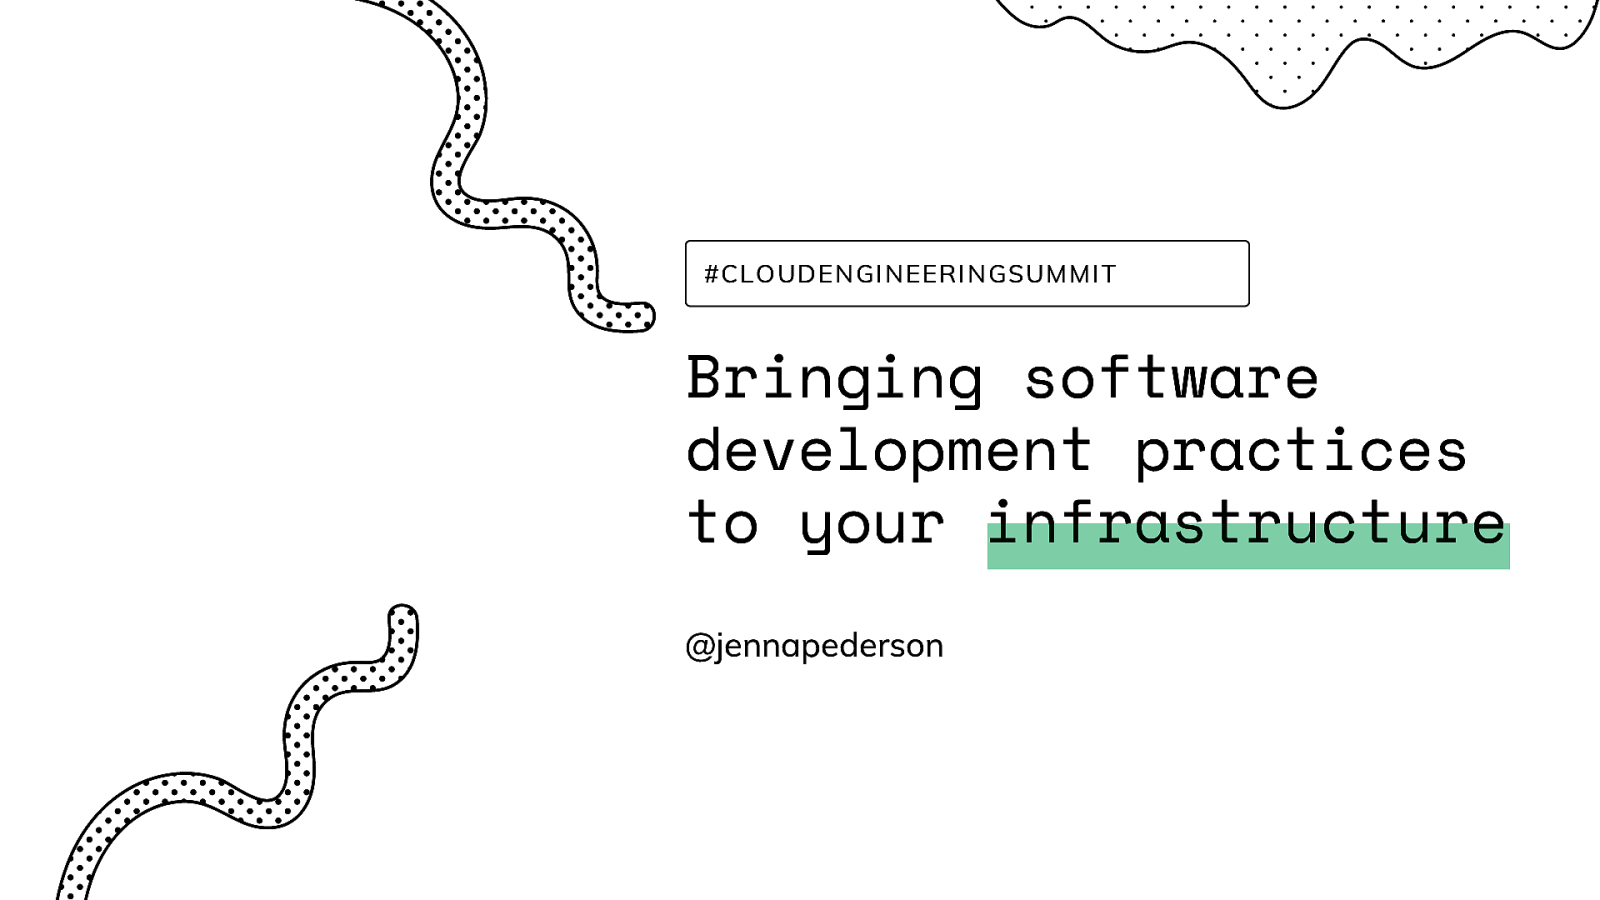 Bringing software development practices to your infrastructure